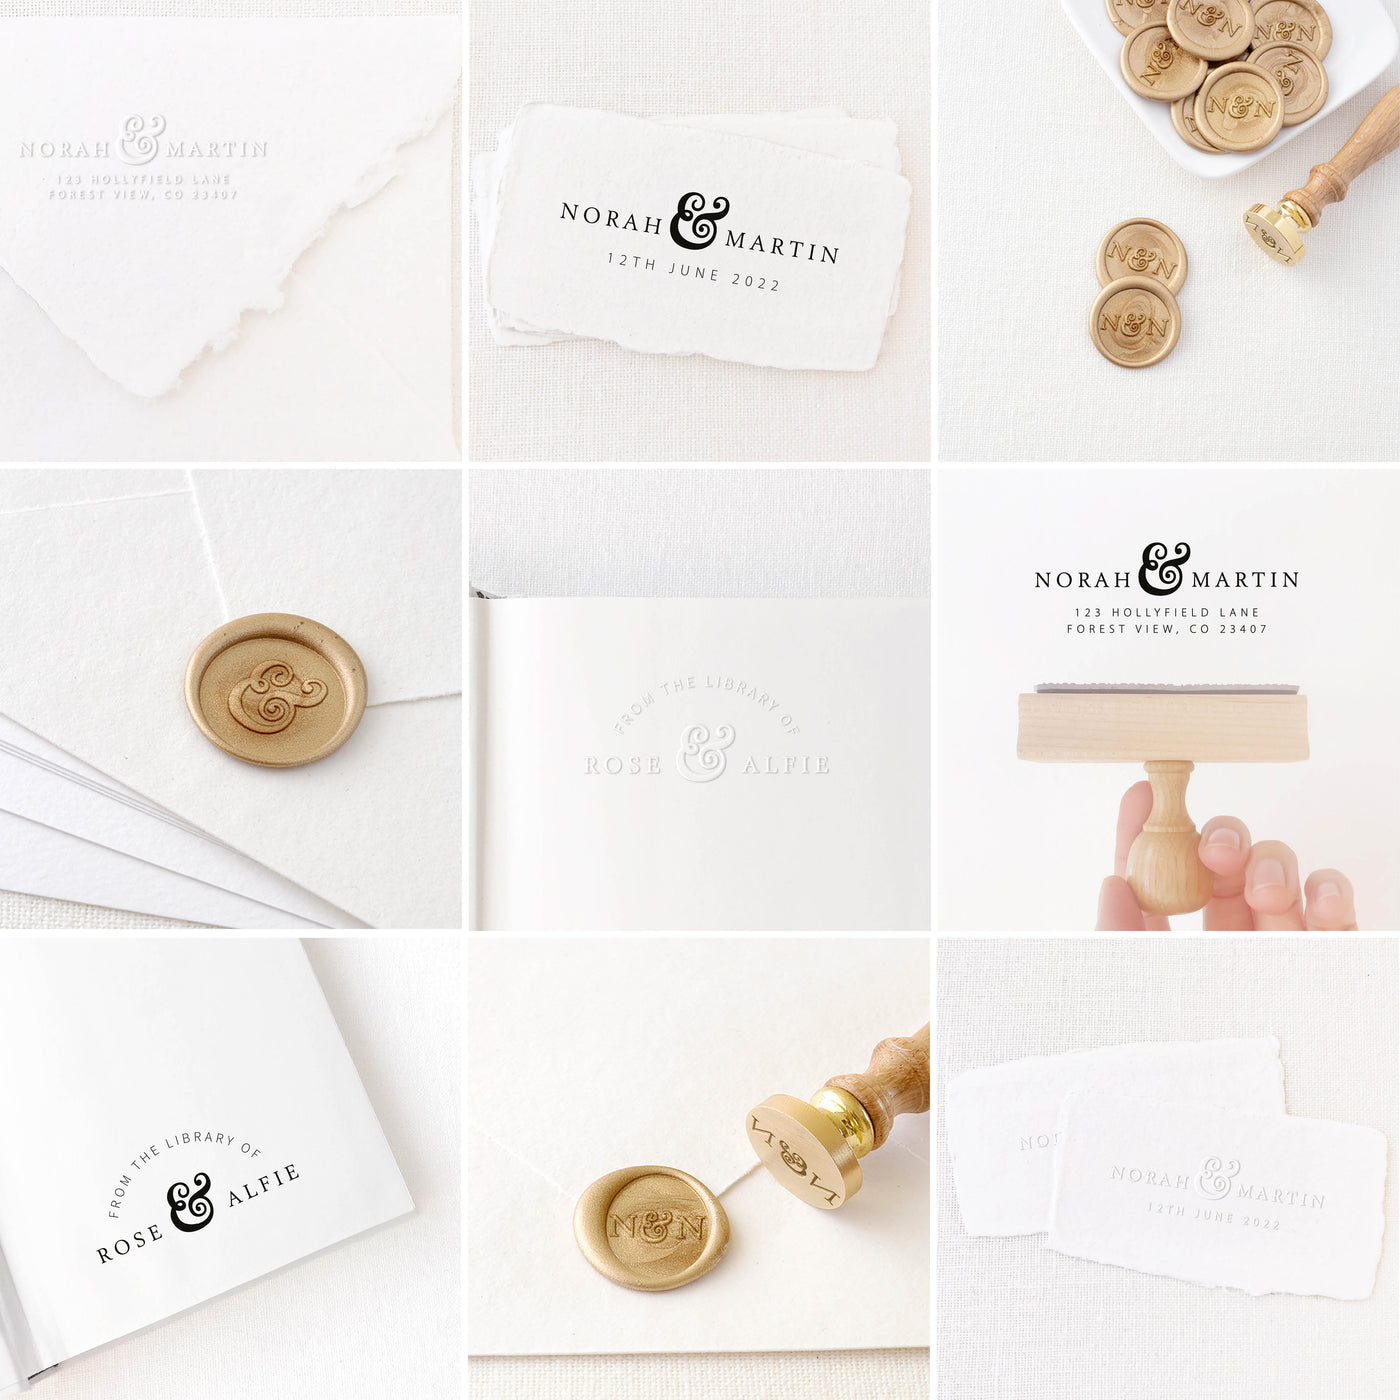 Georgina Elegant Classic Save The Date Rubber Stamp | Custom Rubber Stamp, Wax Seal Stickers & Embosser for Custom Luxe Embellishment Packaging & Fine Art Wedding Stationery Invitations | Heirloom Seals